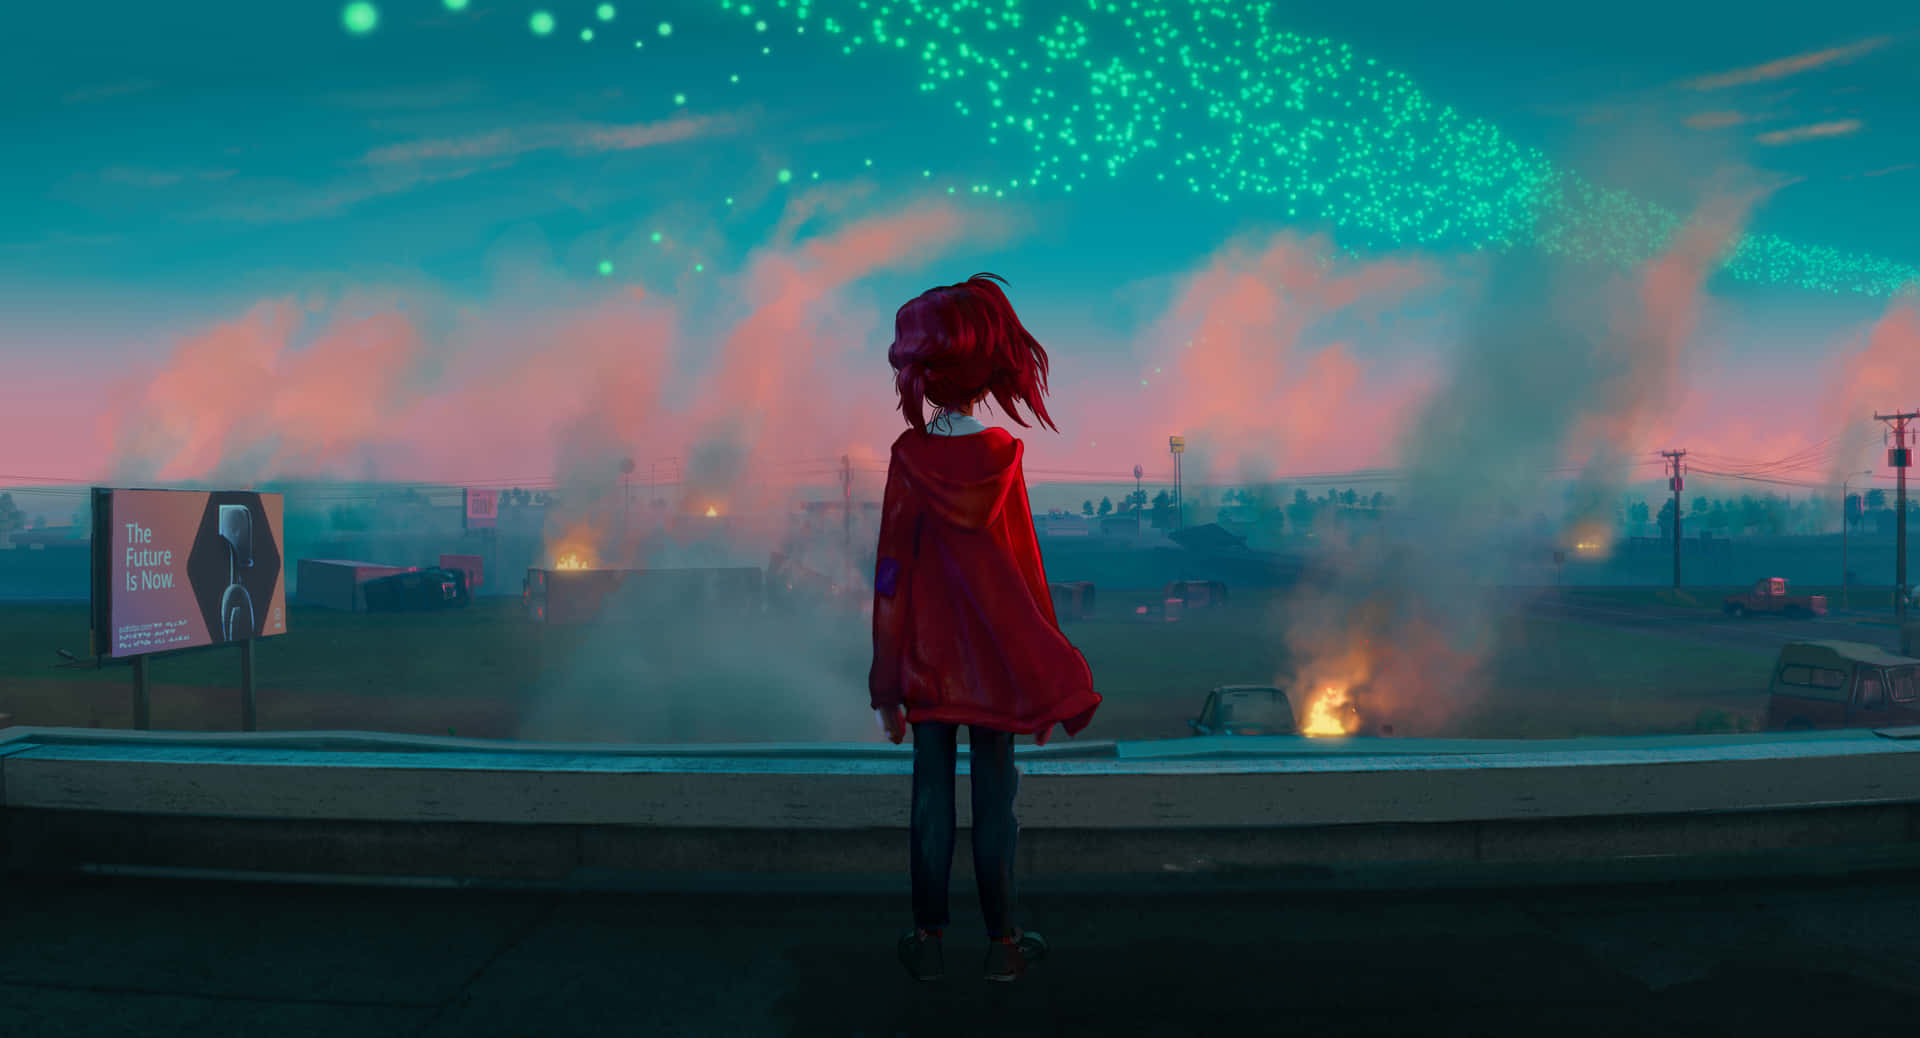 Little Girl In the Movie Connected Wallpaper